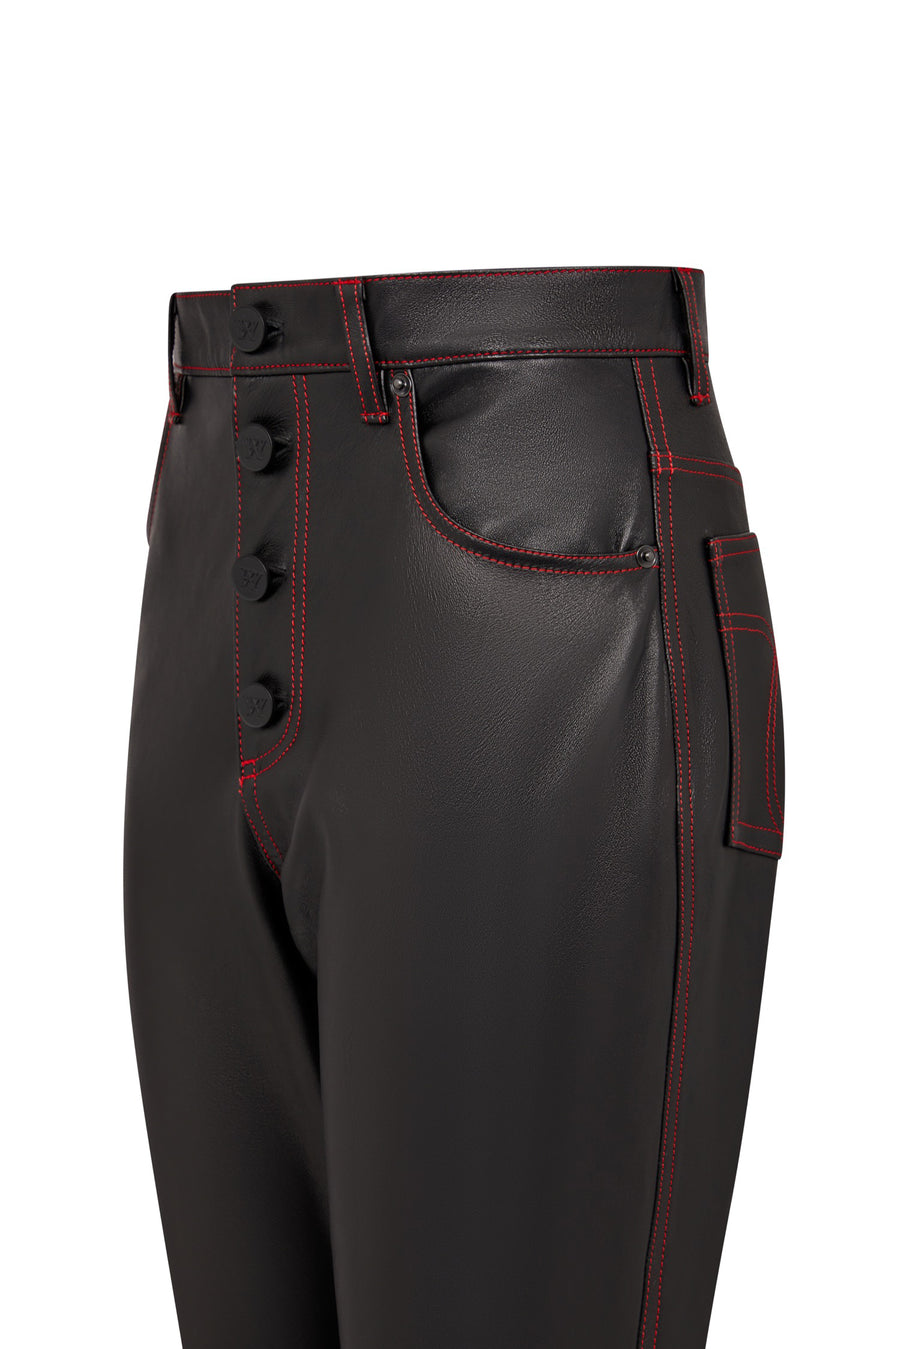 Hardware LDN Black Leather Trousers With Red Stitching 